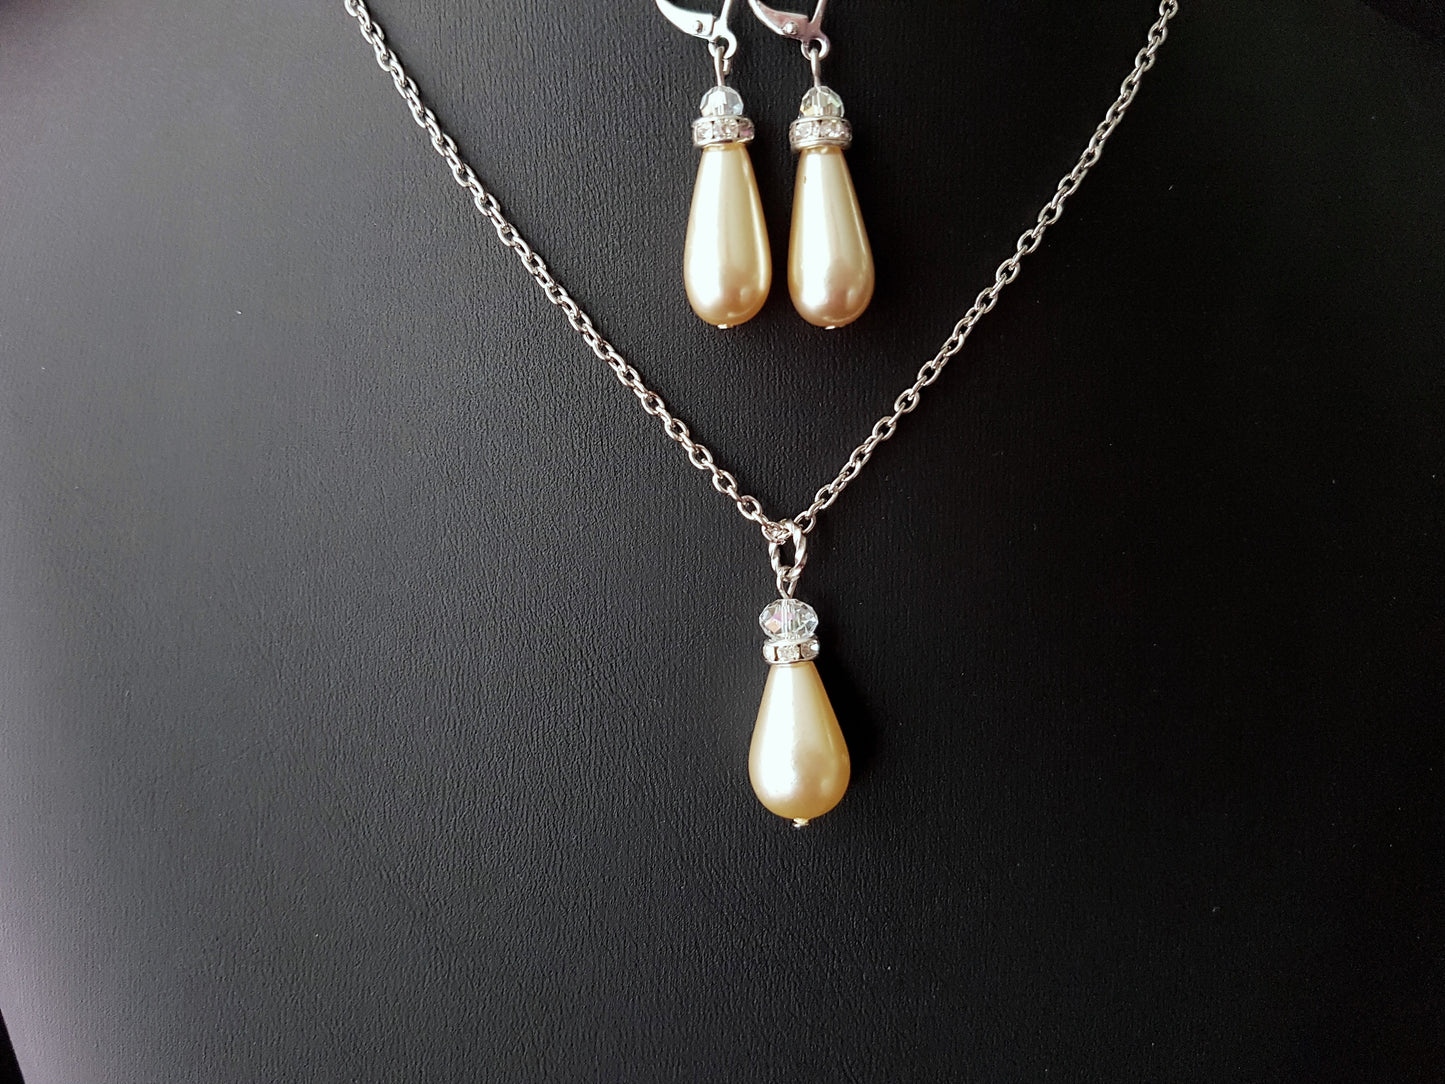 Crystal Pearl Drops Bridal, Bridesmaid Set of Necklace and Earrings, Off White-Cream Glass Drop Shape Pearls, Minimalist 